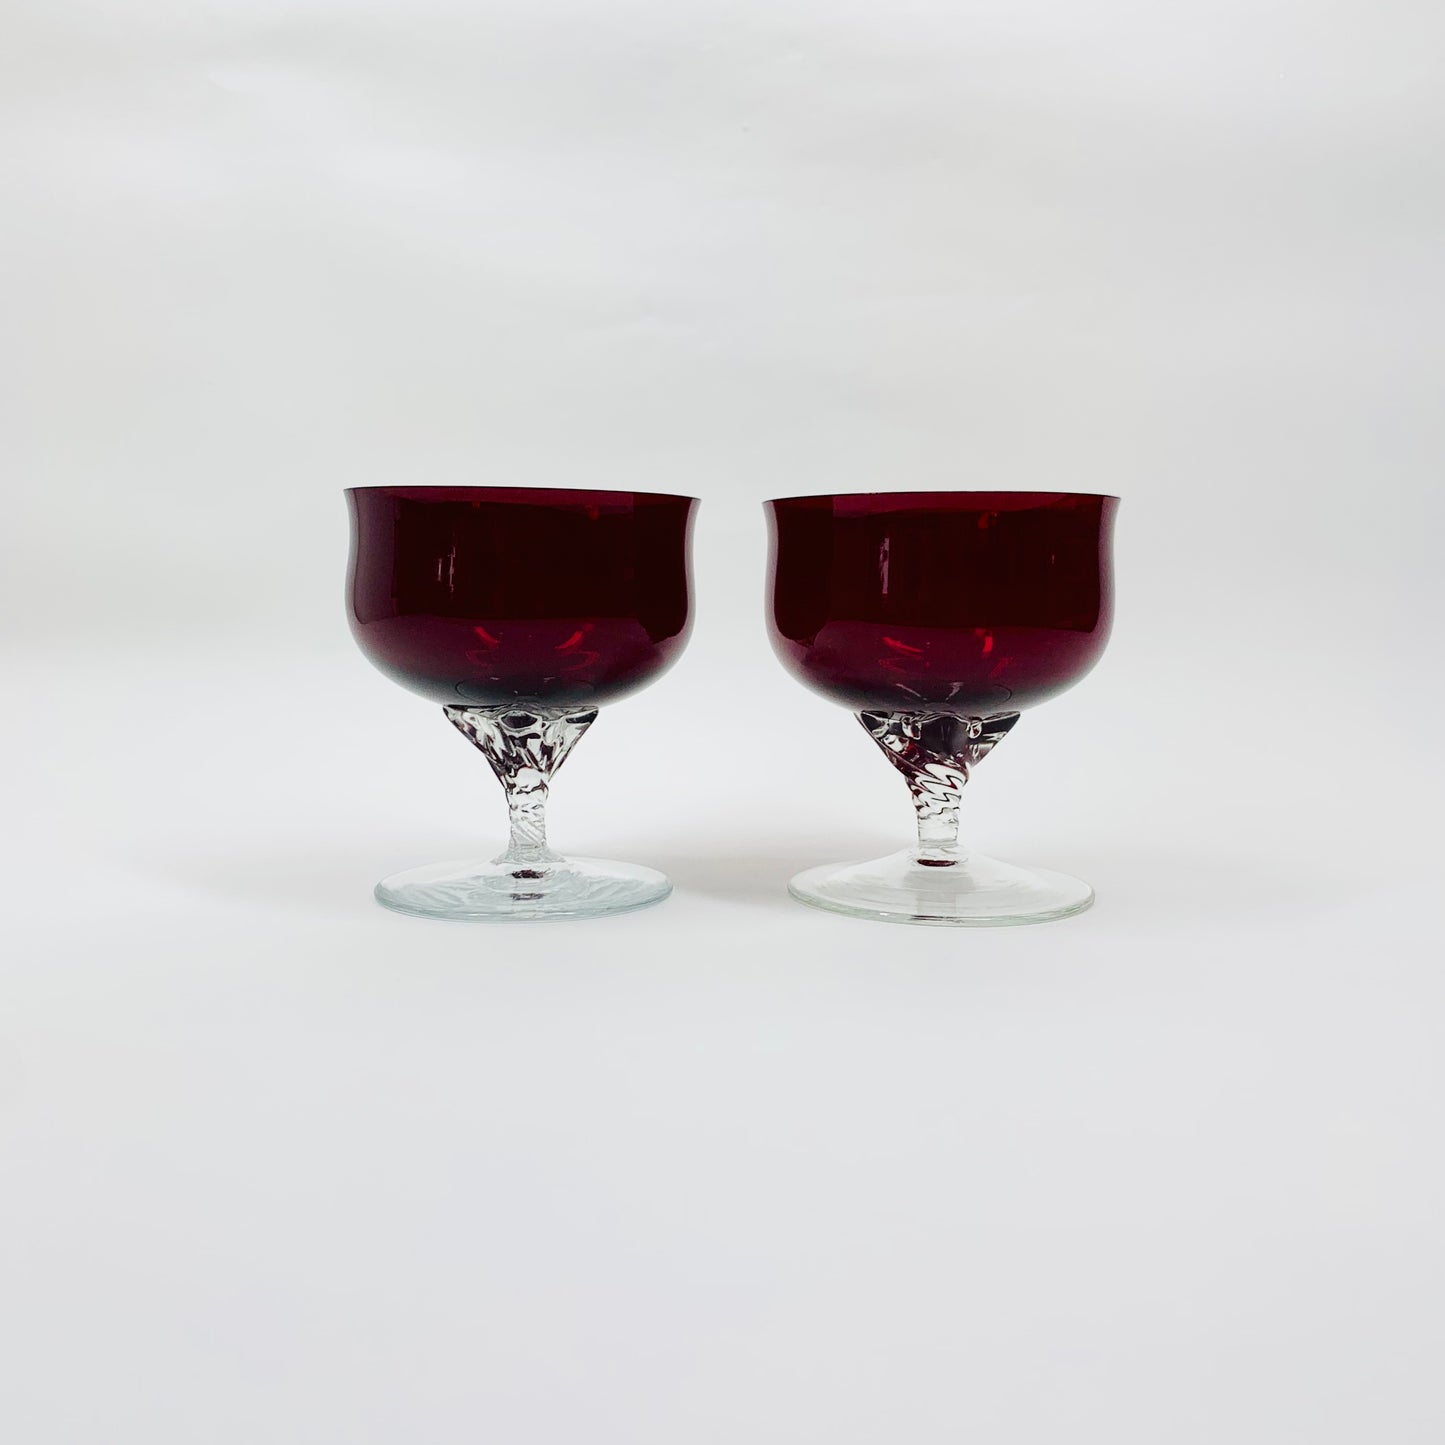 Midcentury red glass coupe with clear twist stem